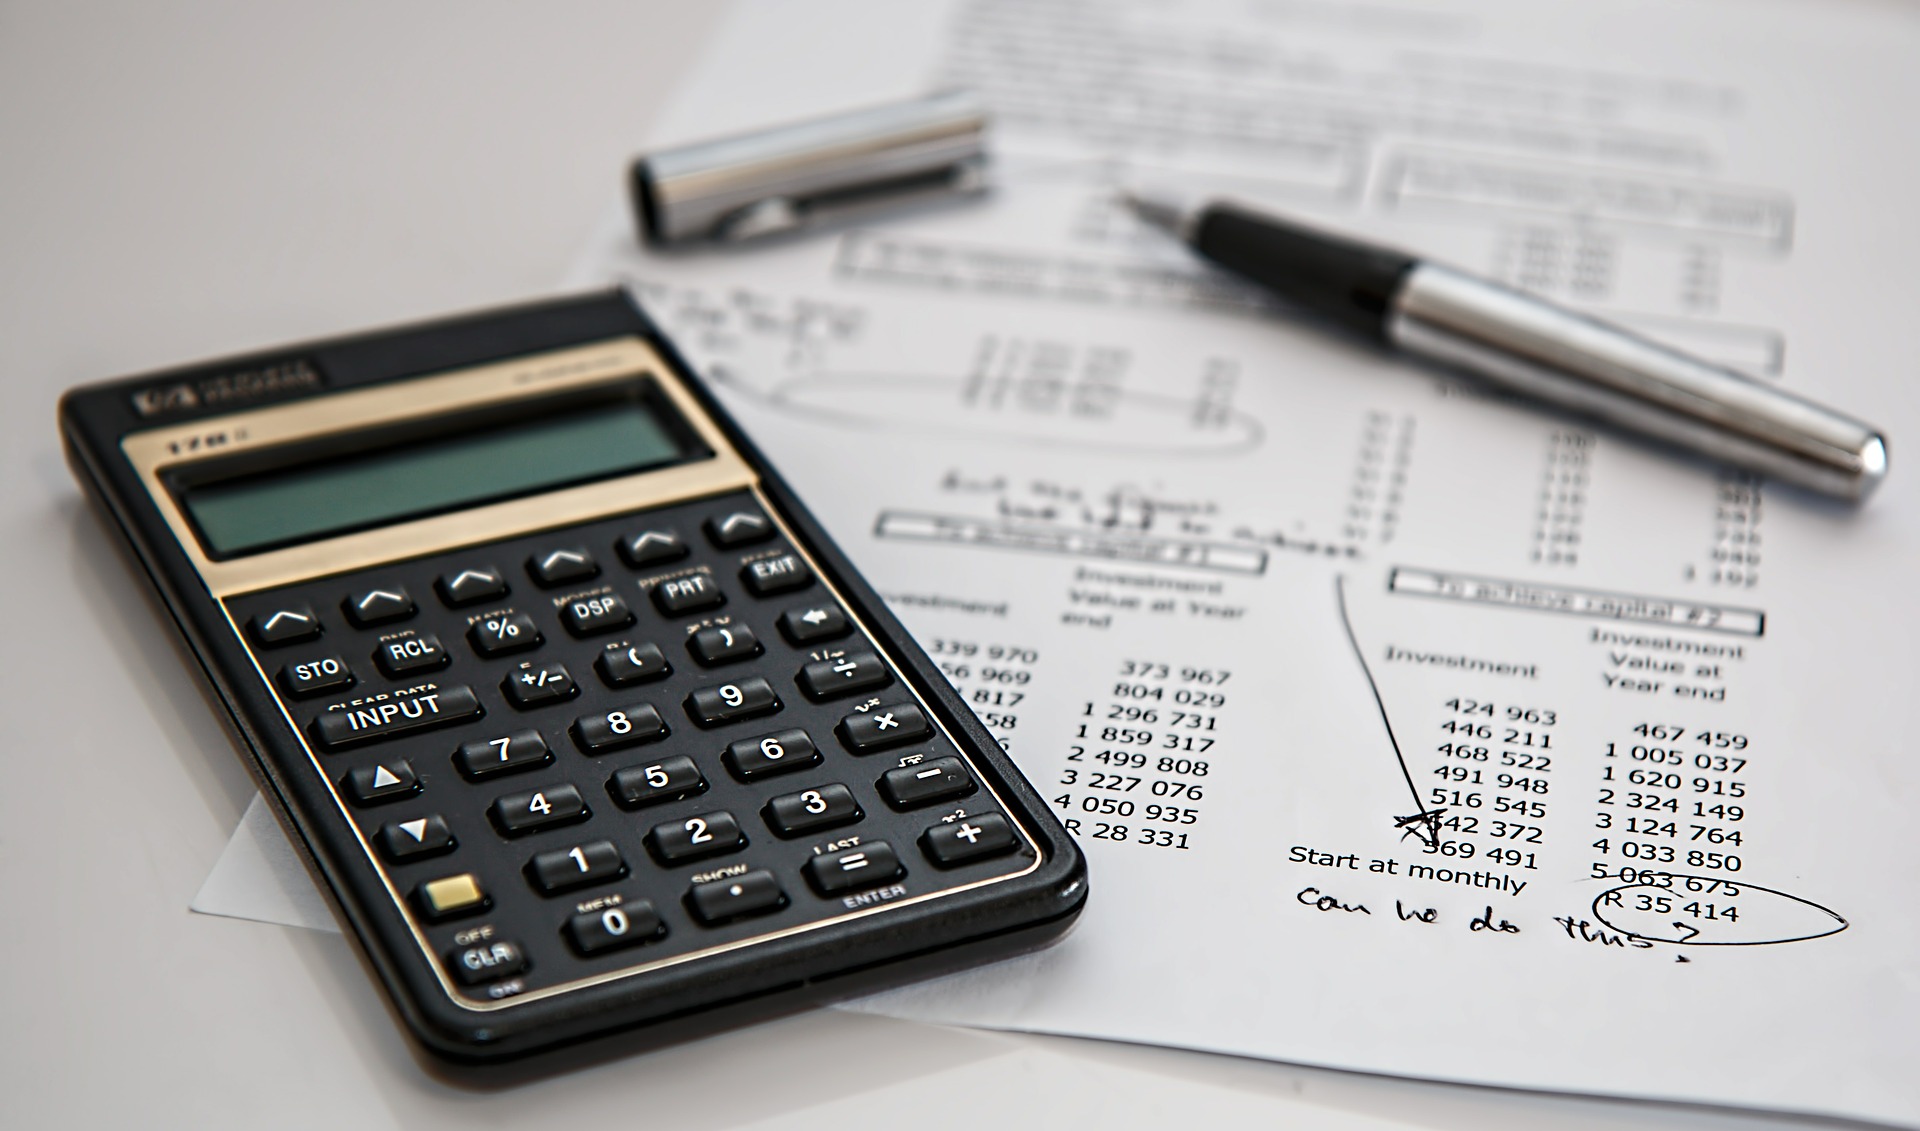 Small business owners need to know some crucial invoicing terms